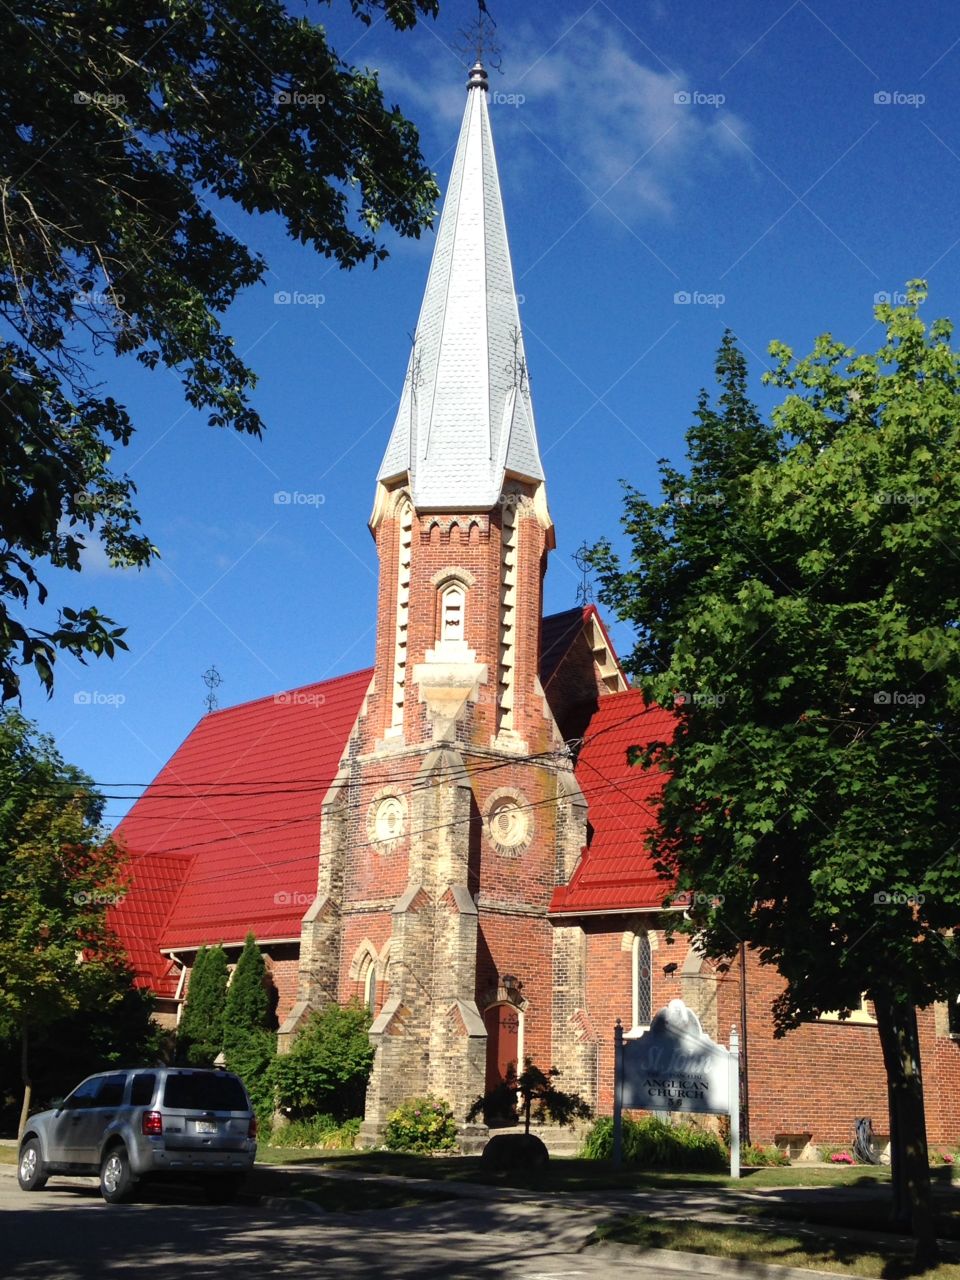 Church with a red roof